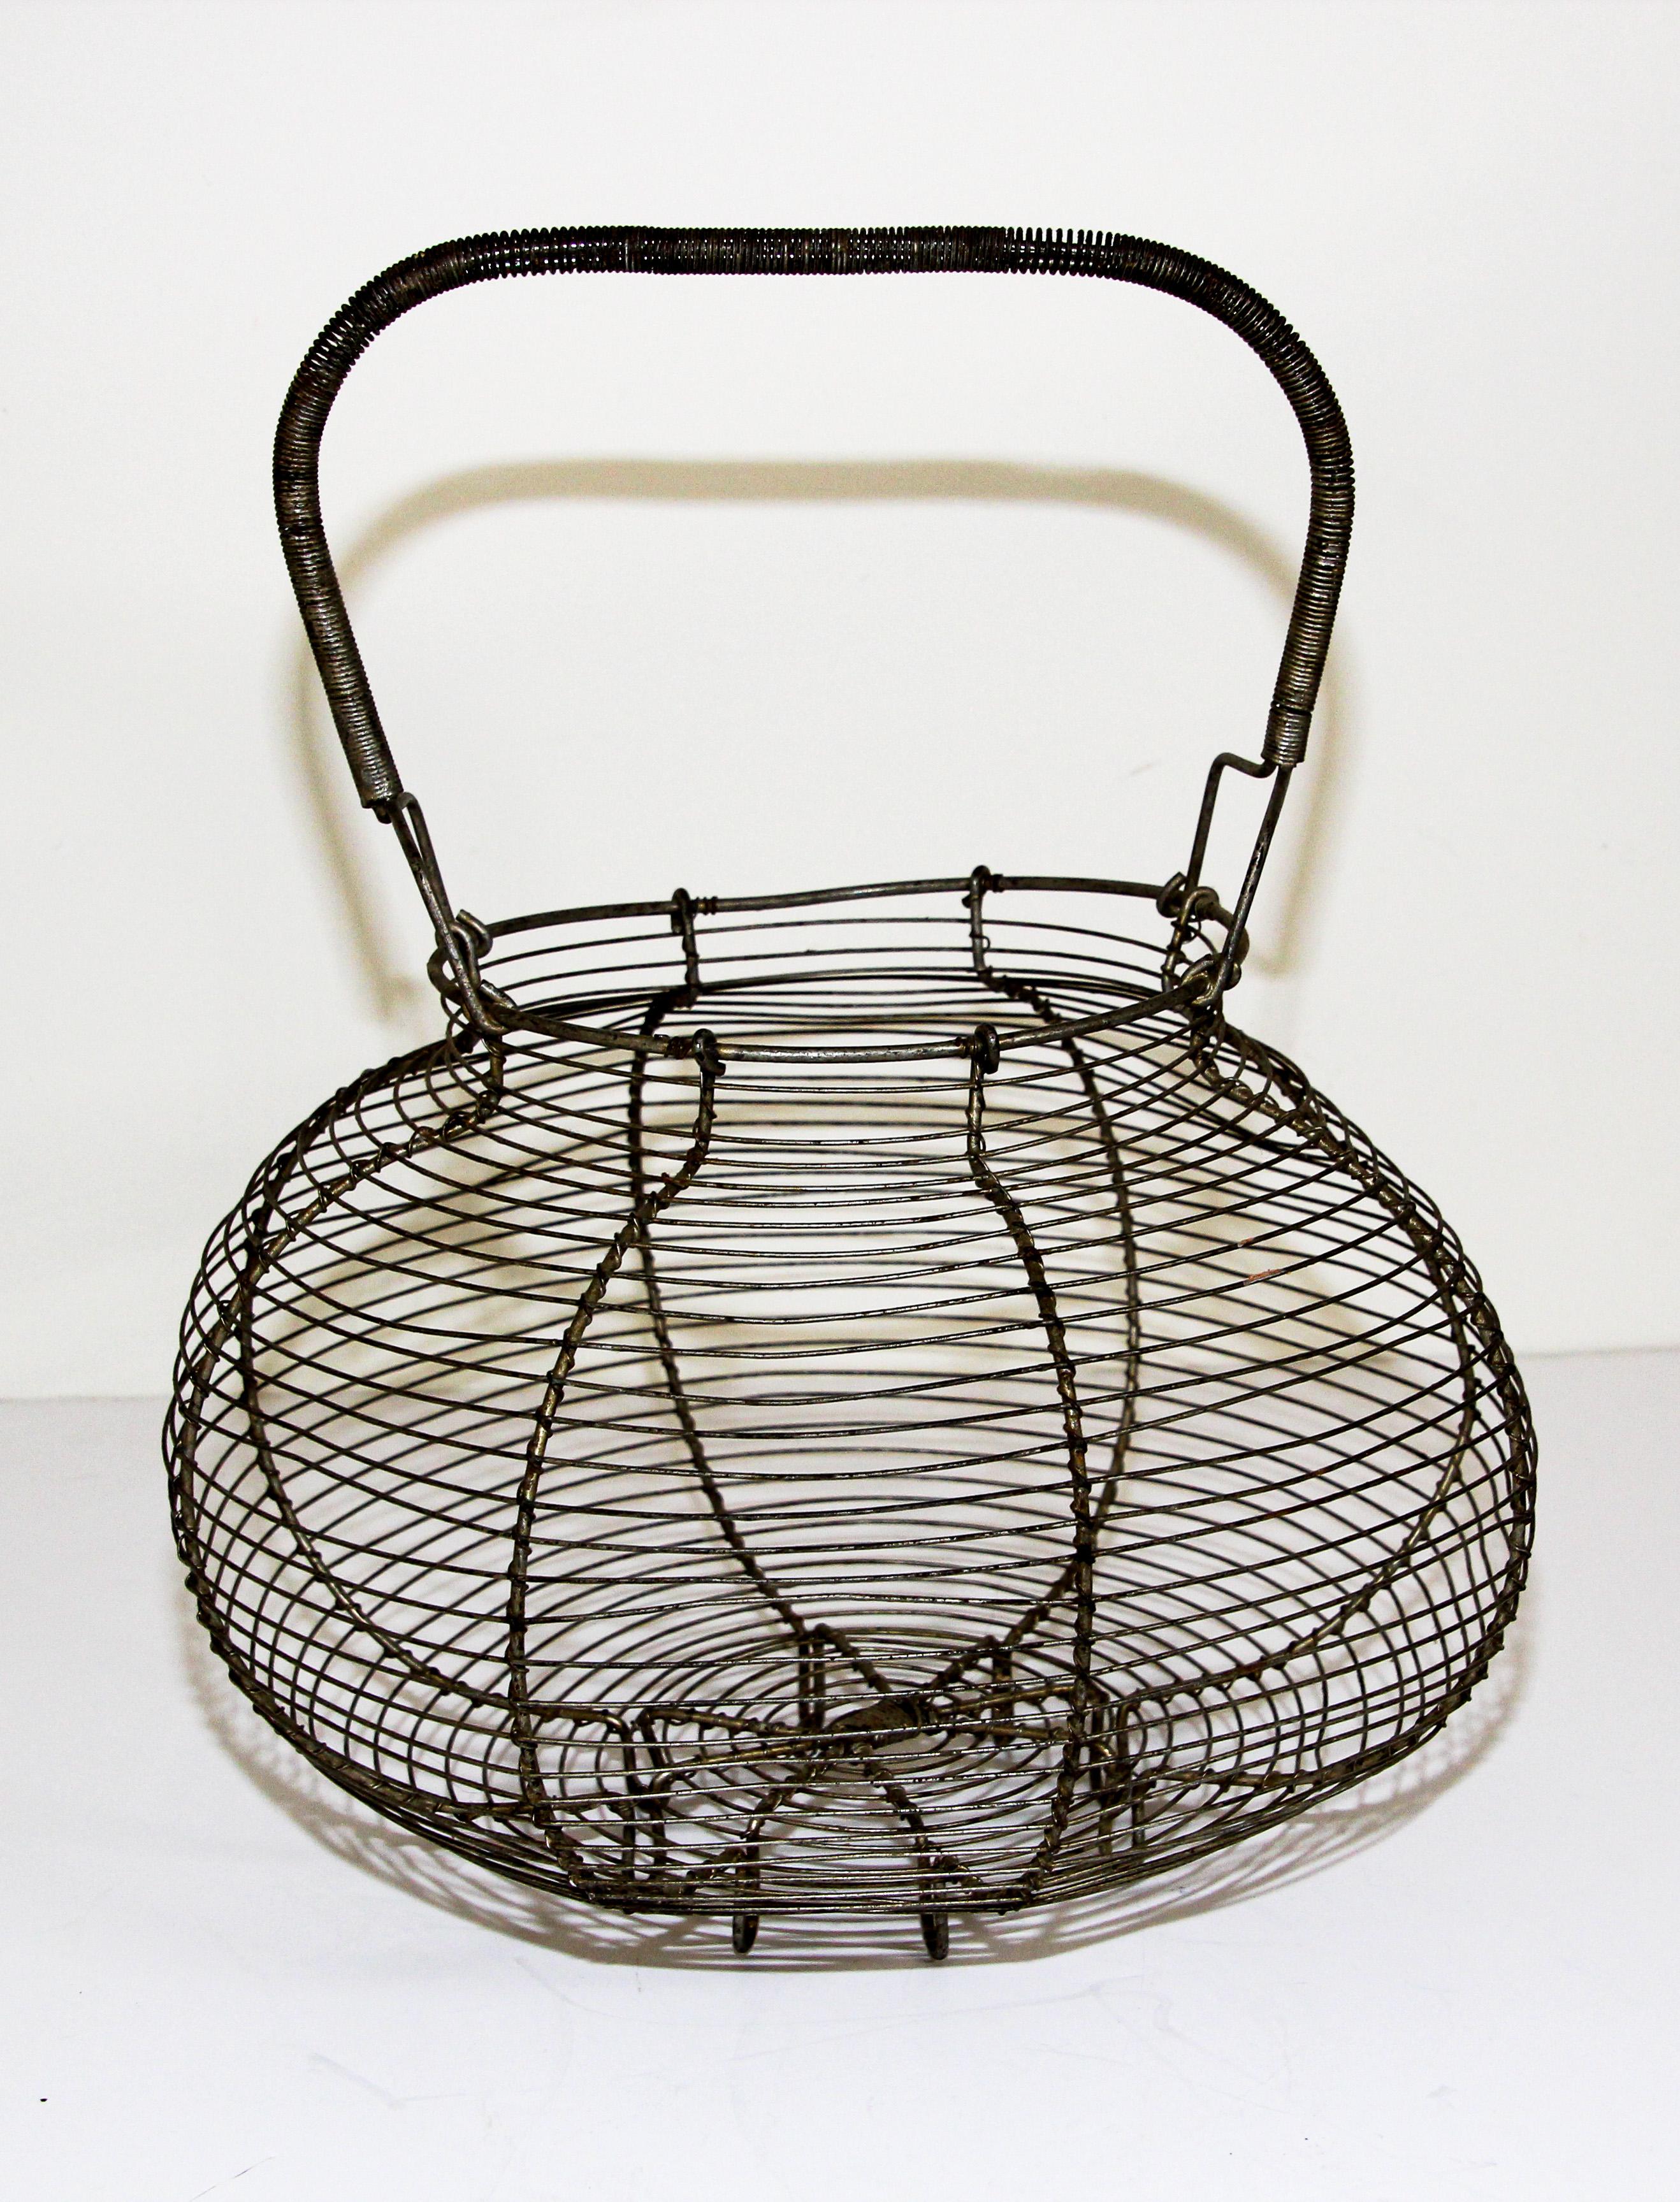 Antique French wire egg decorative basket with handle, circa 1940's.
This early little country rustic handle wire basket is in fine condition.
coiled handle, loop feet.
It is ideal for collecting eggs, gathering vegetables from the garden, or as a